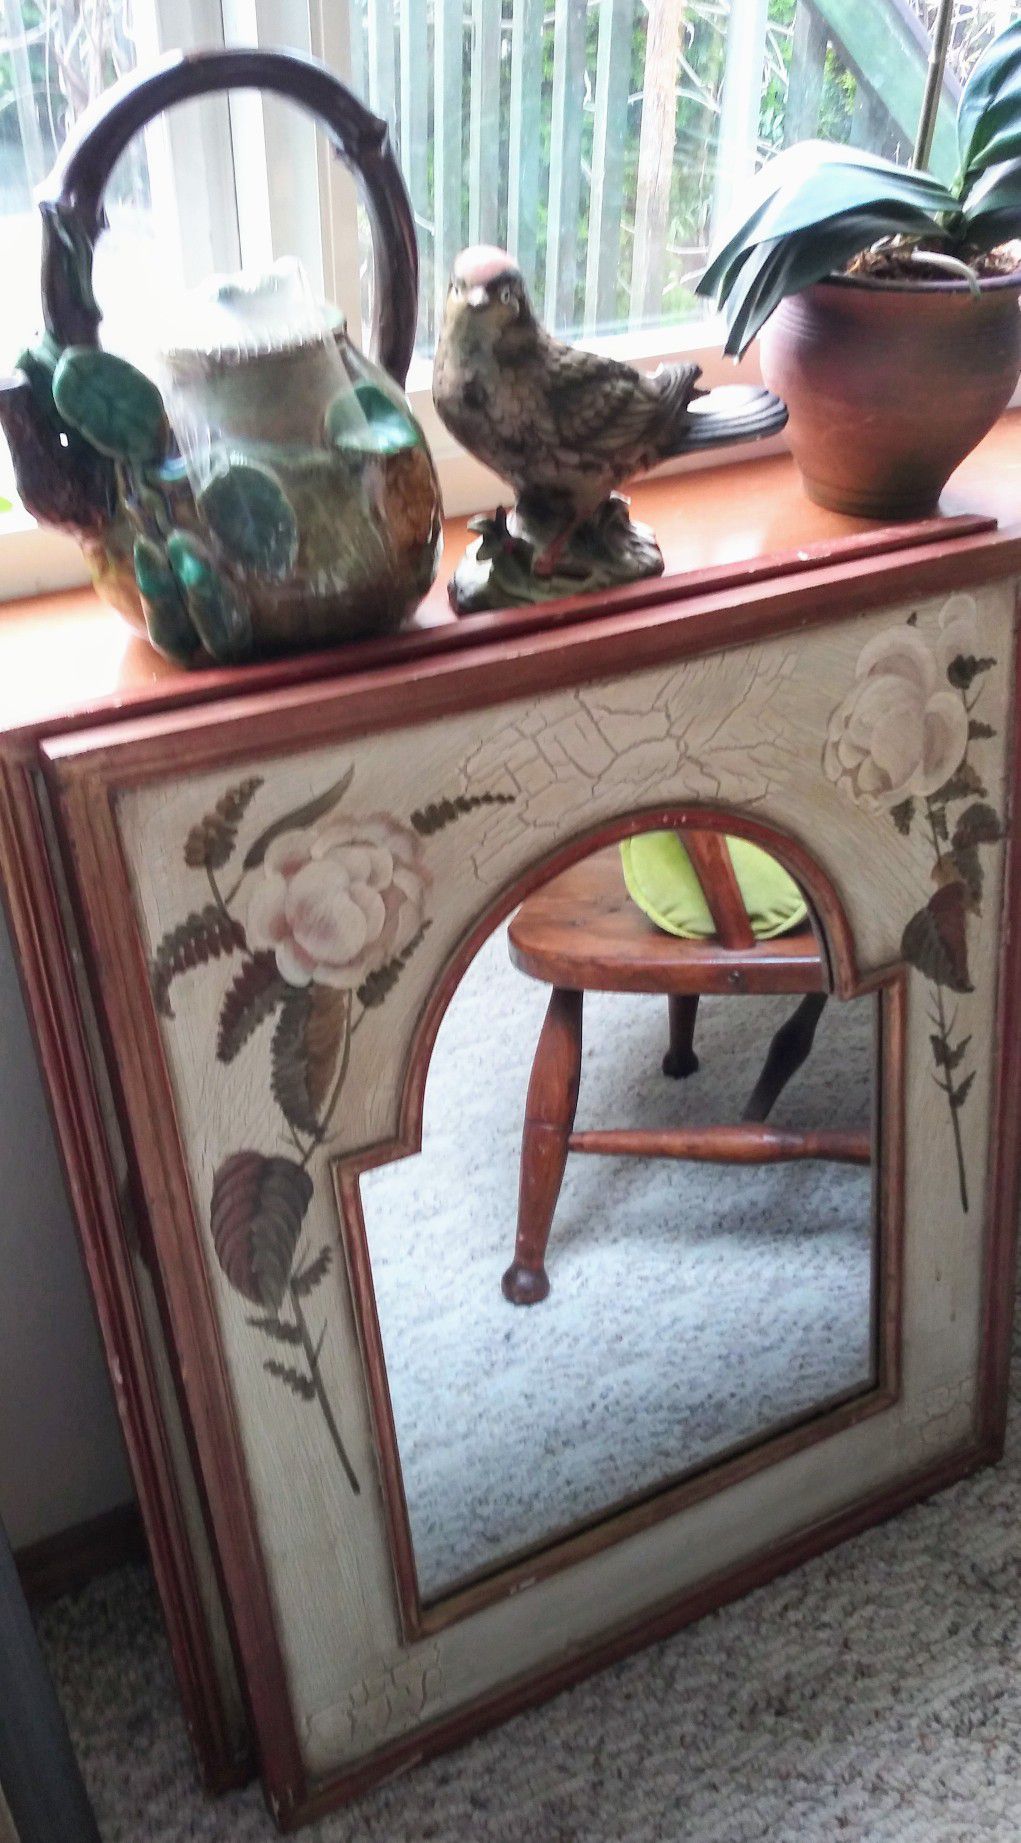 $5&up! Always Avail: Wood, Rattan, Wicker, Orig Art Painting s, Gold & Iron Metal,  Mirror s Decor Frame s, Sets, Tray s Trunk Table Chairs +100s MORE